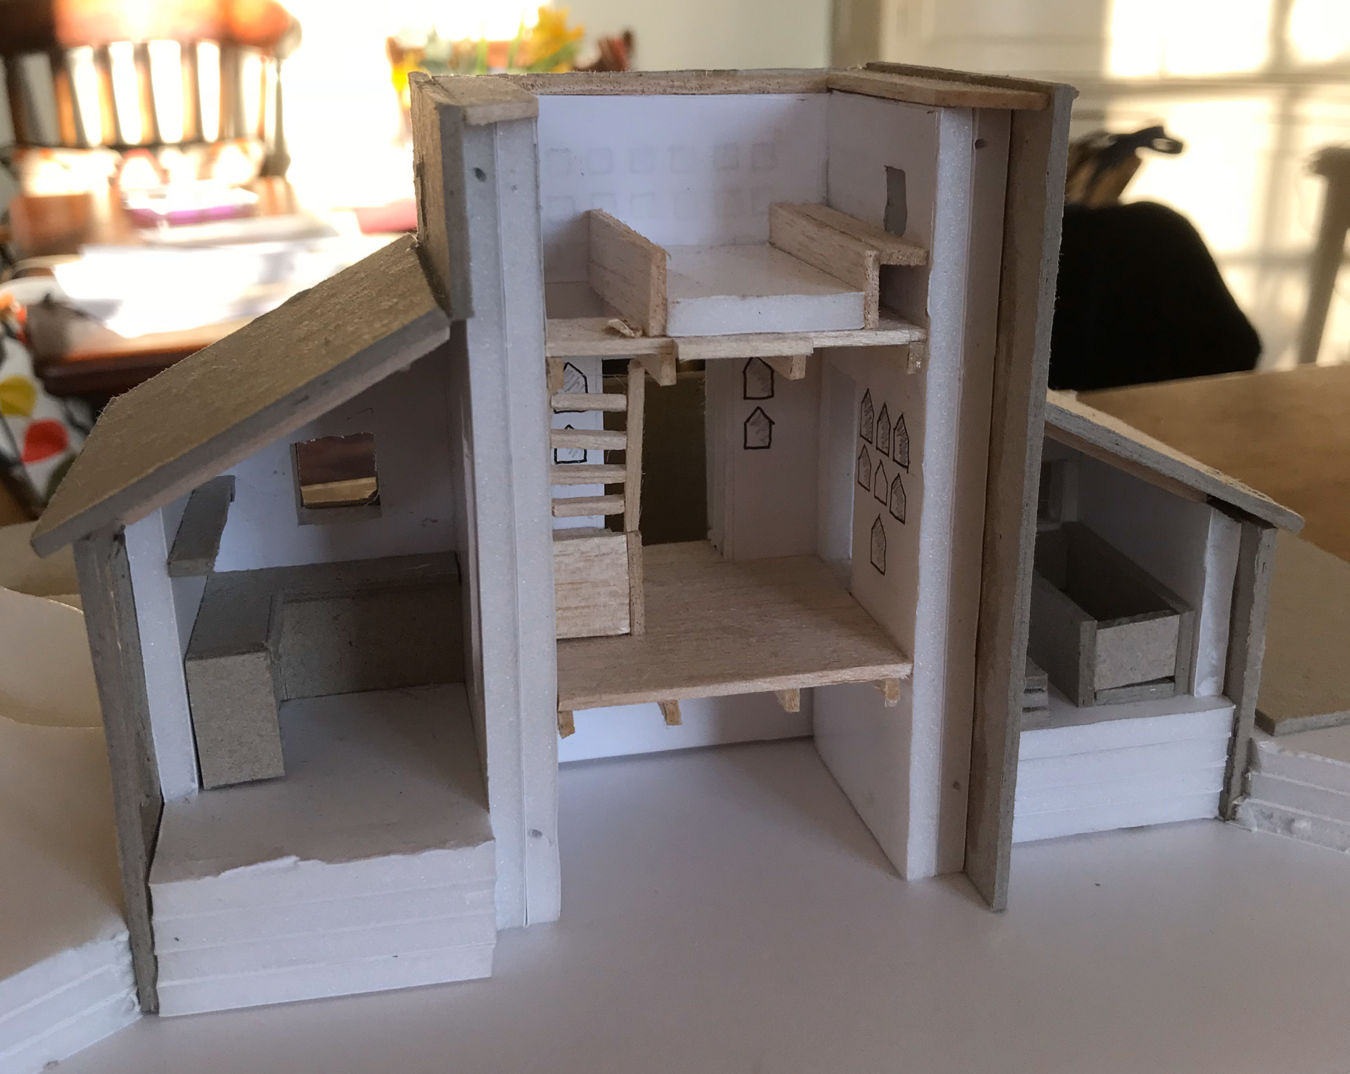 Architect model of the Dovecot at reeddsfor showing the interior space